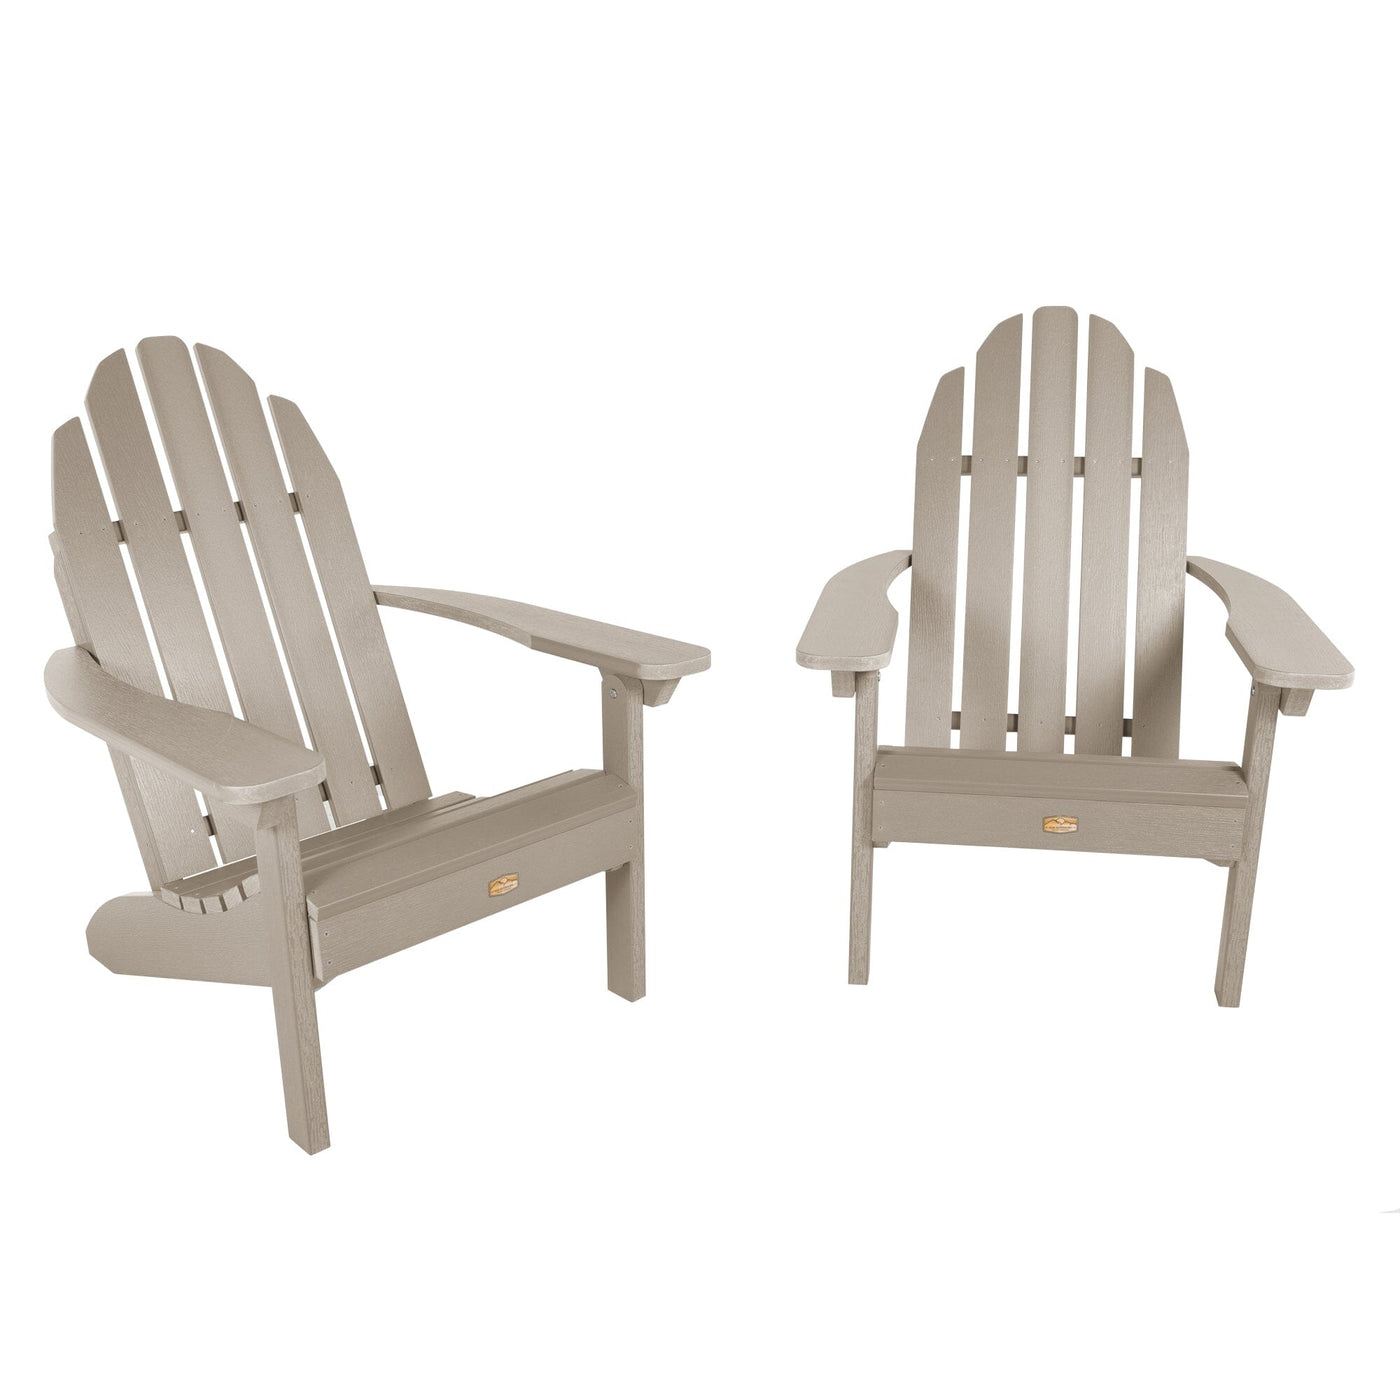 Set of 2 Essential Adirondack Chairs Kitted Sets ELK OUTDOORS® Woodland Brown 